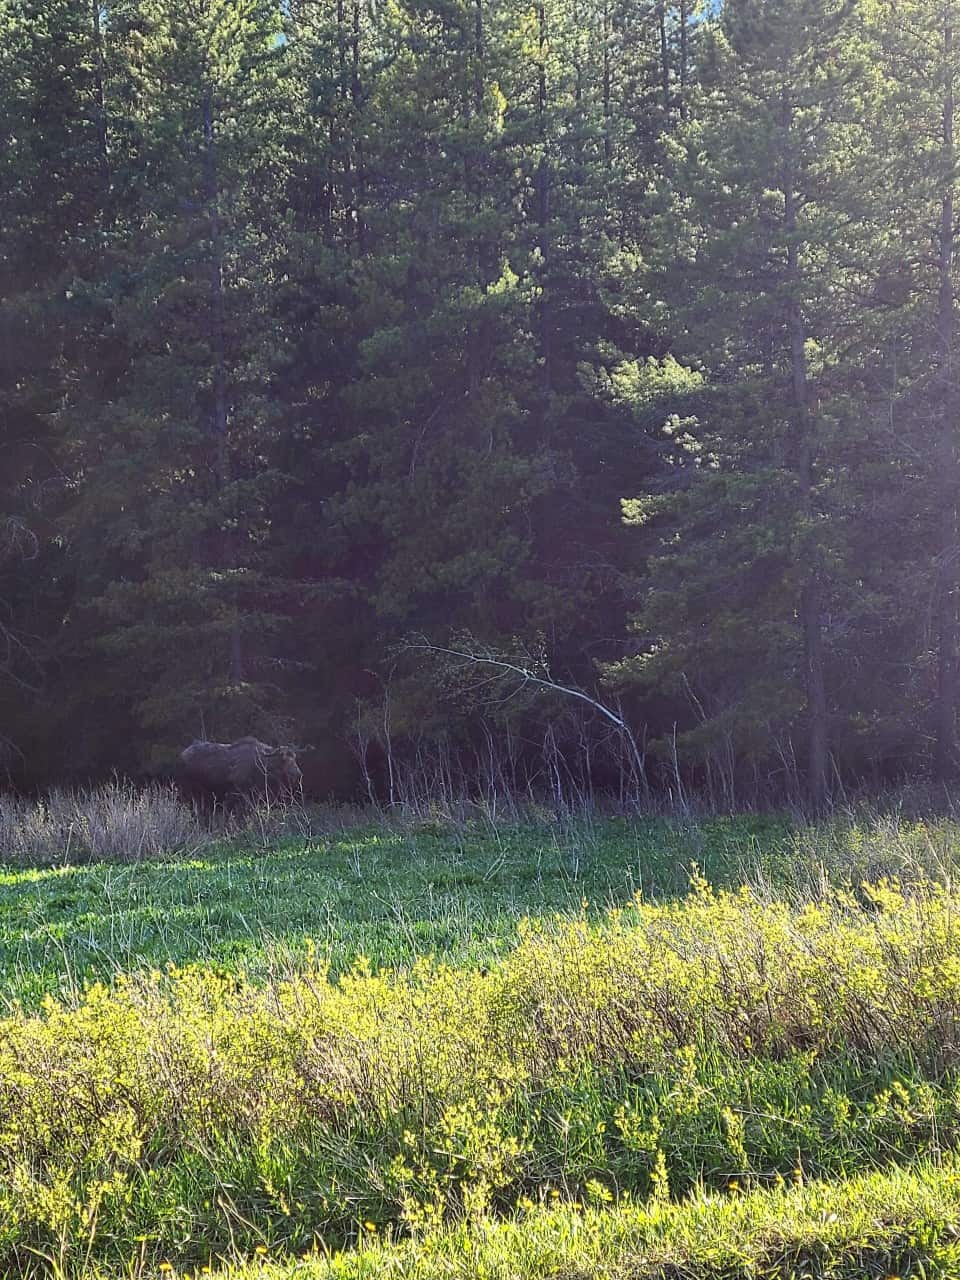 Moose Sightings in Southern Alberta  - So easy to miss these guys as the sun is setting. I was just saying earlier in the day it would be nice to see a Moose, that it had been awhile. Made my day